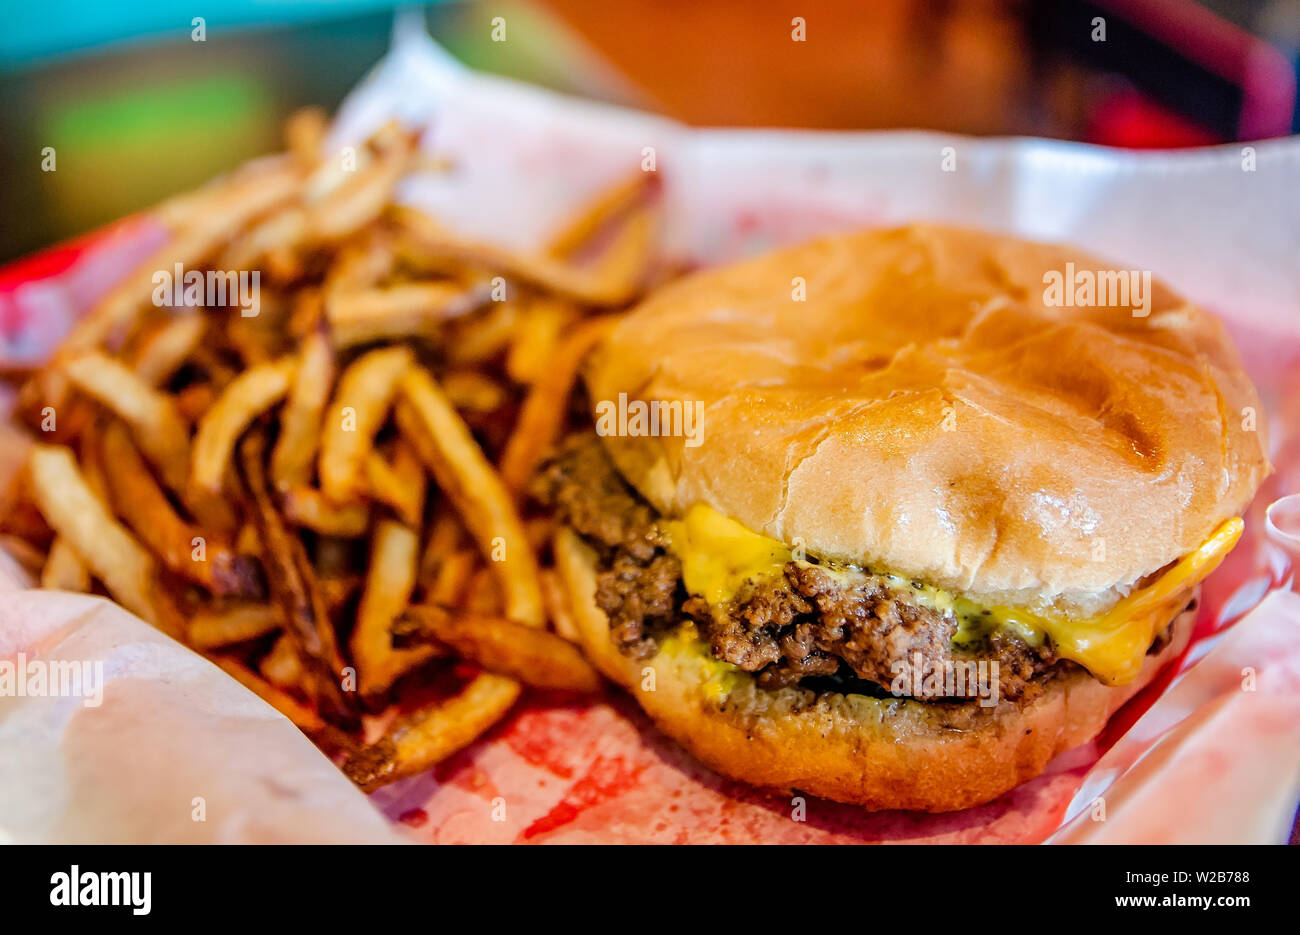 A cheeseburger and french fries is served in a basket at Dyer’s Burgers, Sept. 12, 2015, in Memphis, Tennessee. Dyer’s opened in 1912. Stock Photo